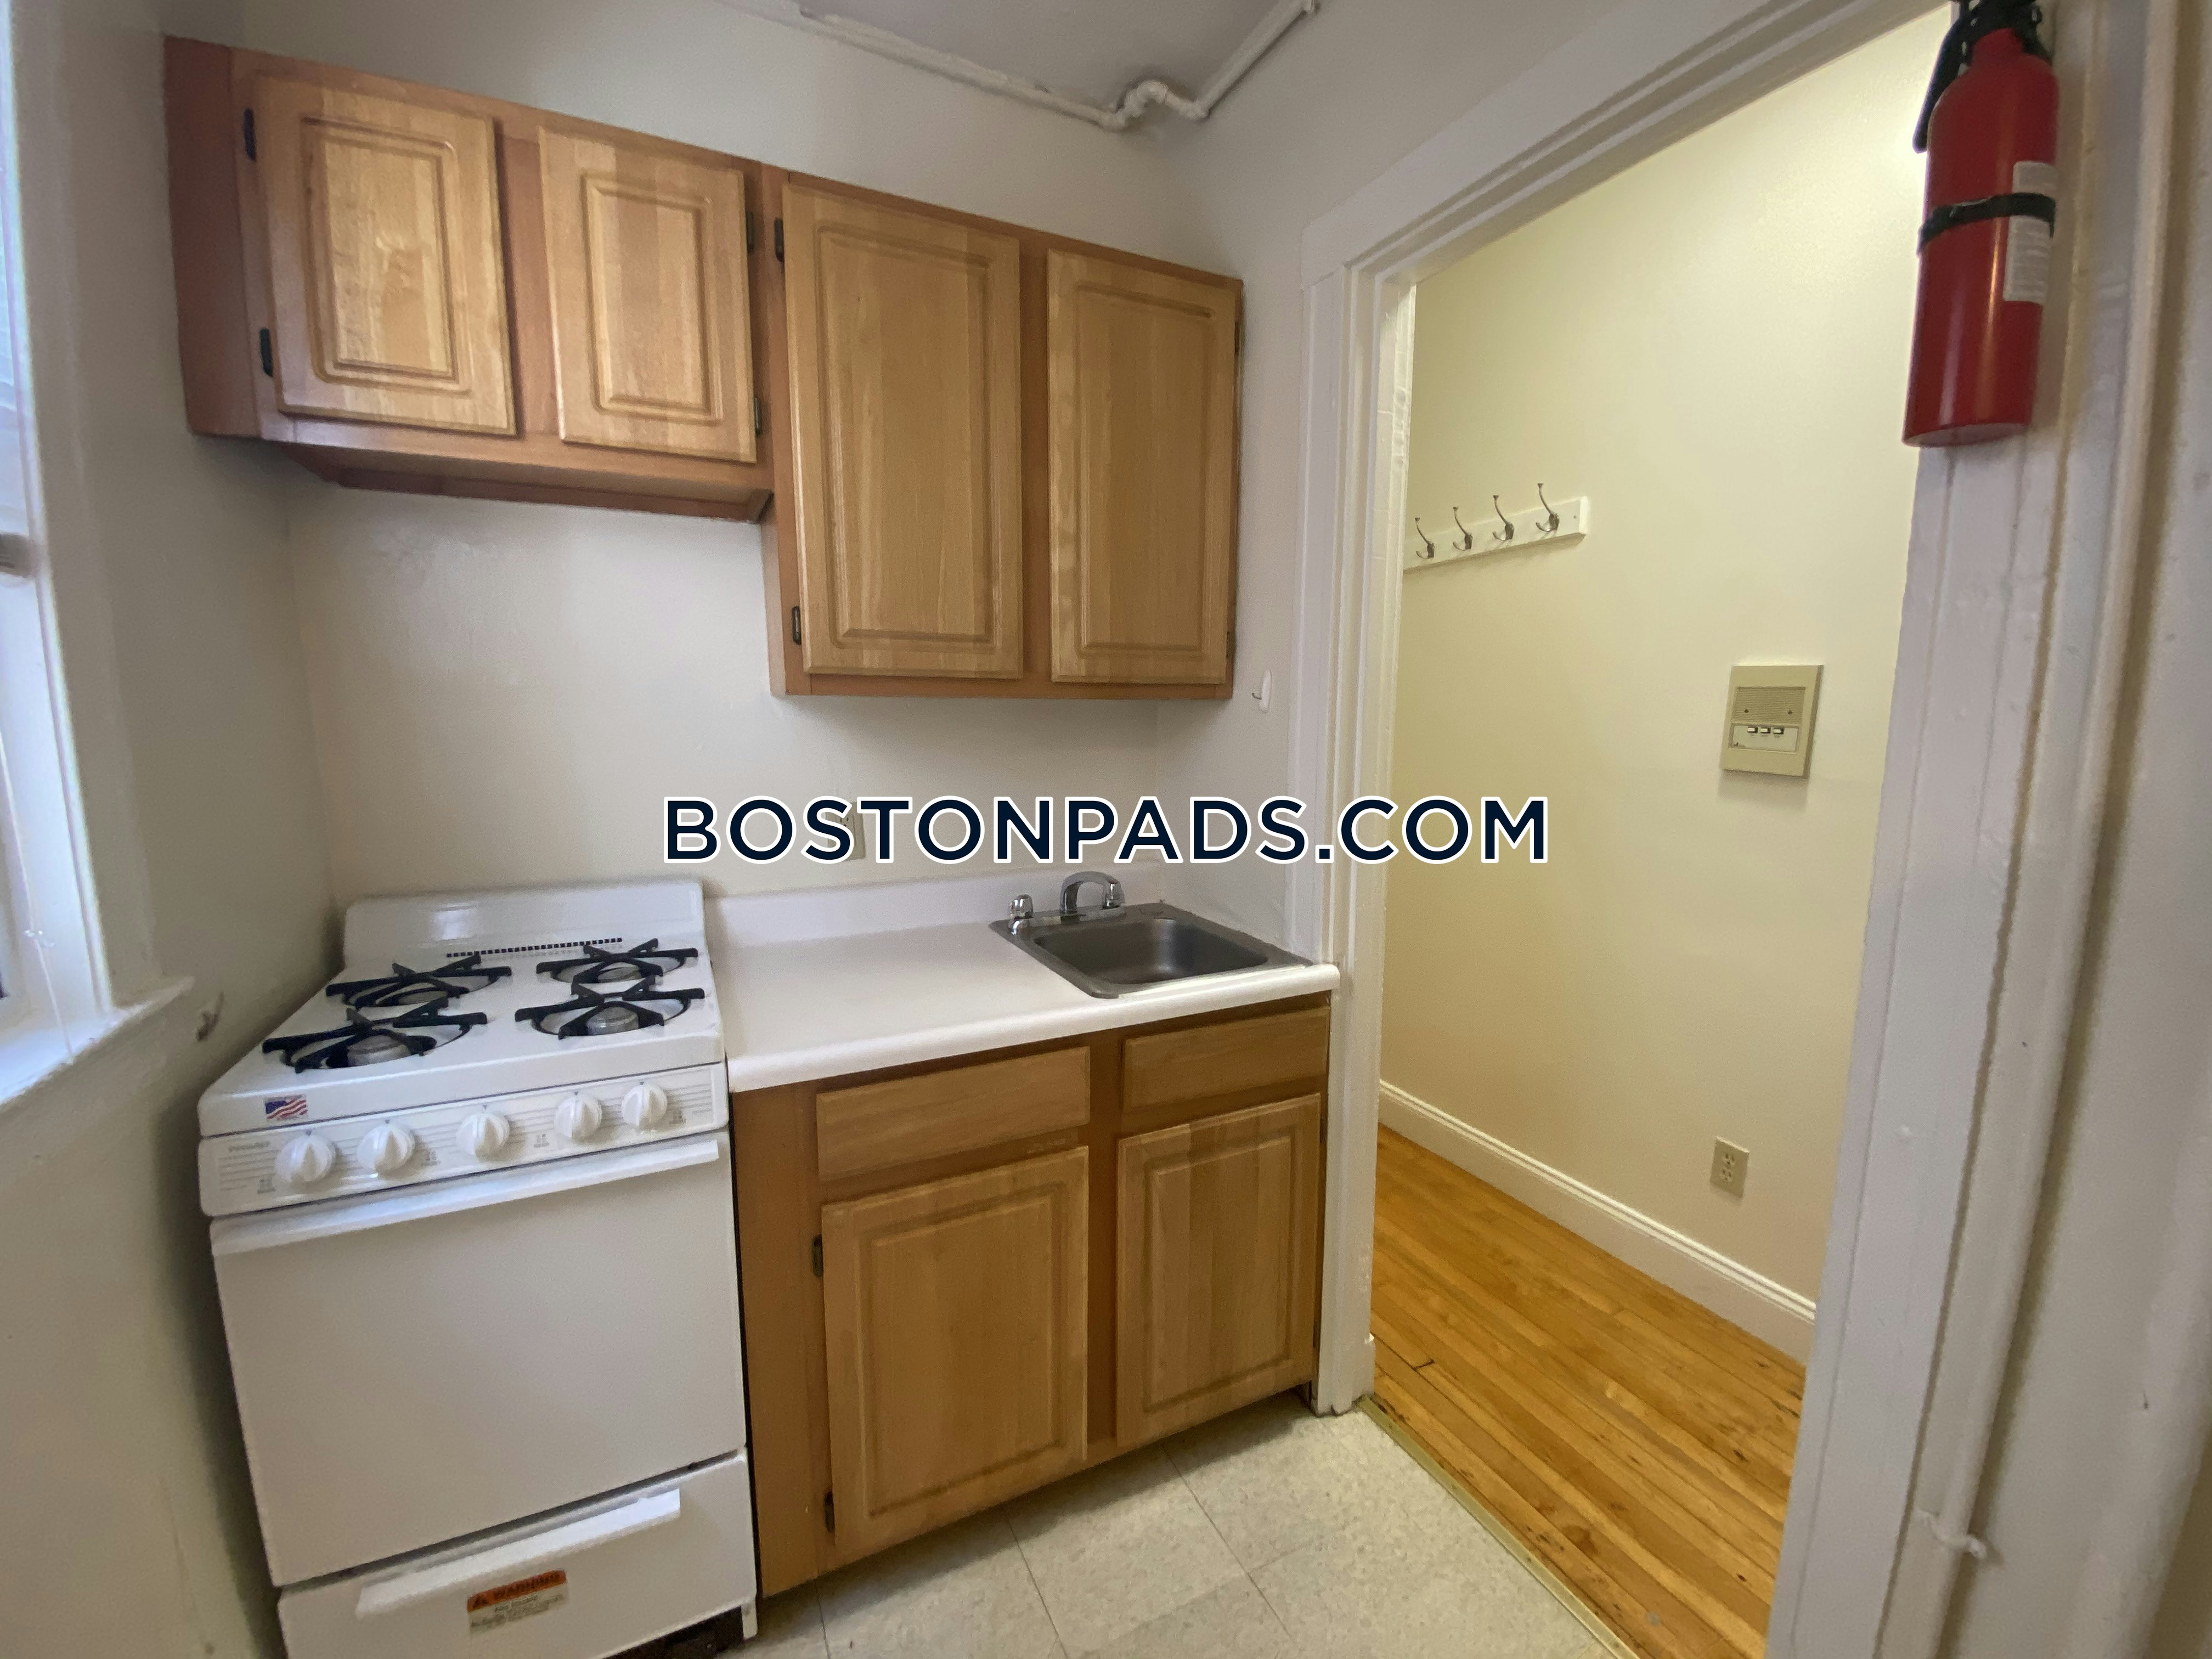 New Apartments Near Symphony Boston for Living room